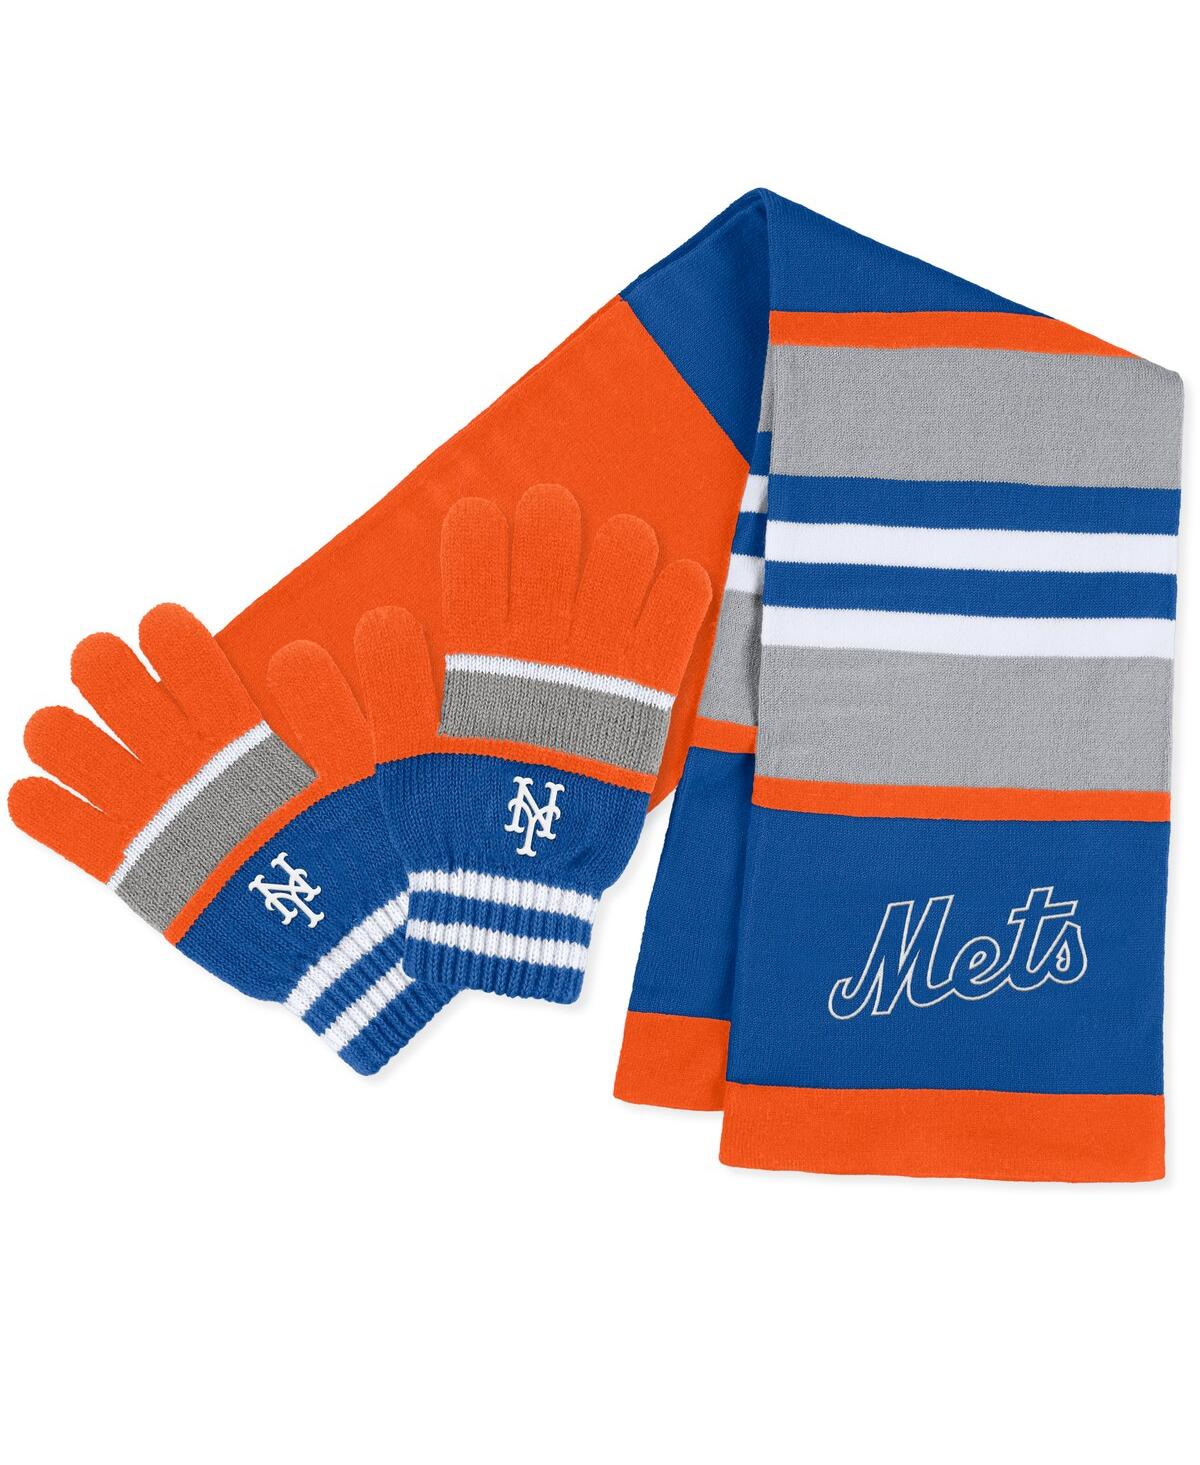 Women's Wear by Erin Andrews New York Mets Stripe Glove and Scarf Set - Red, Blue